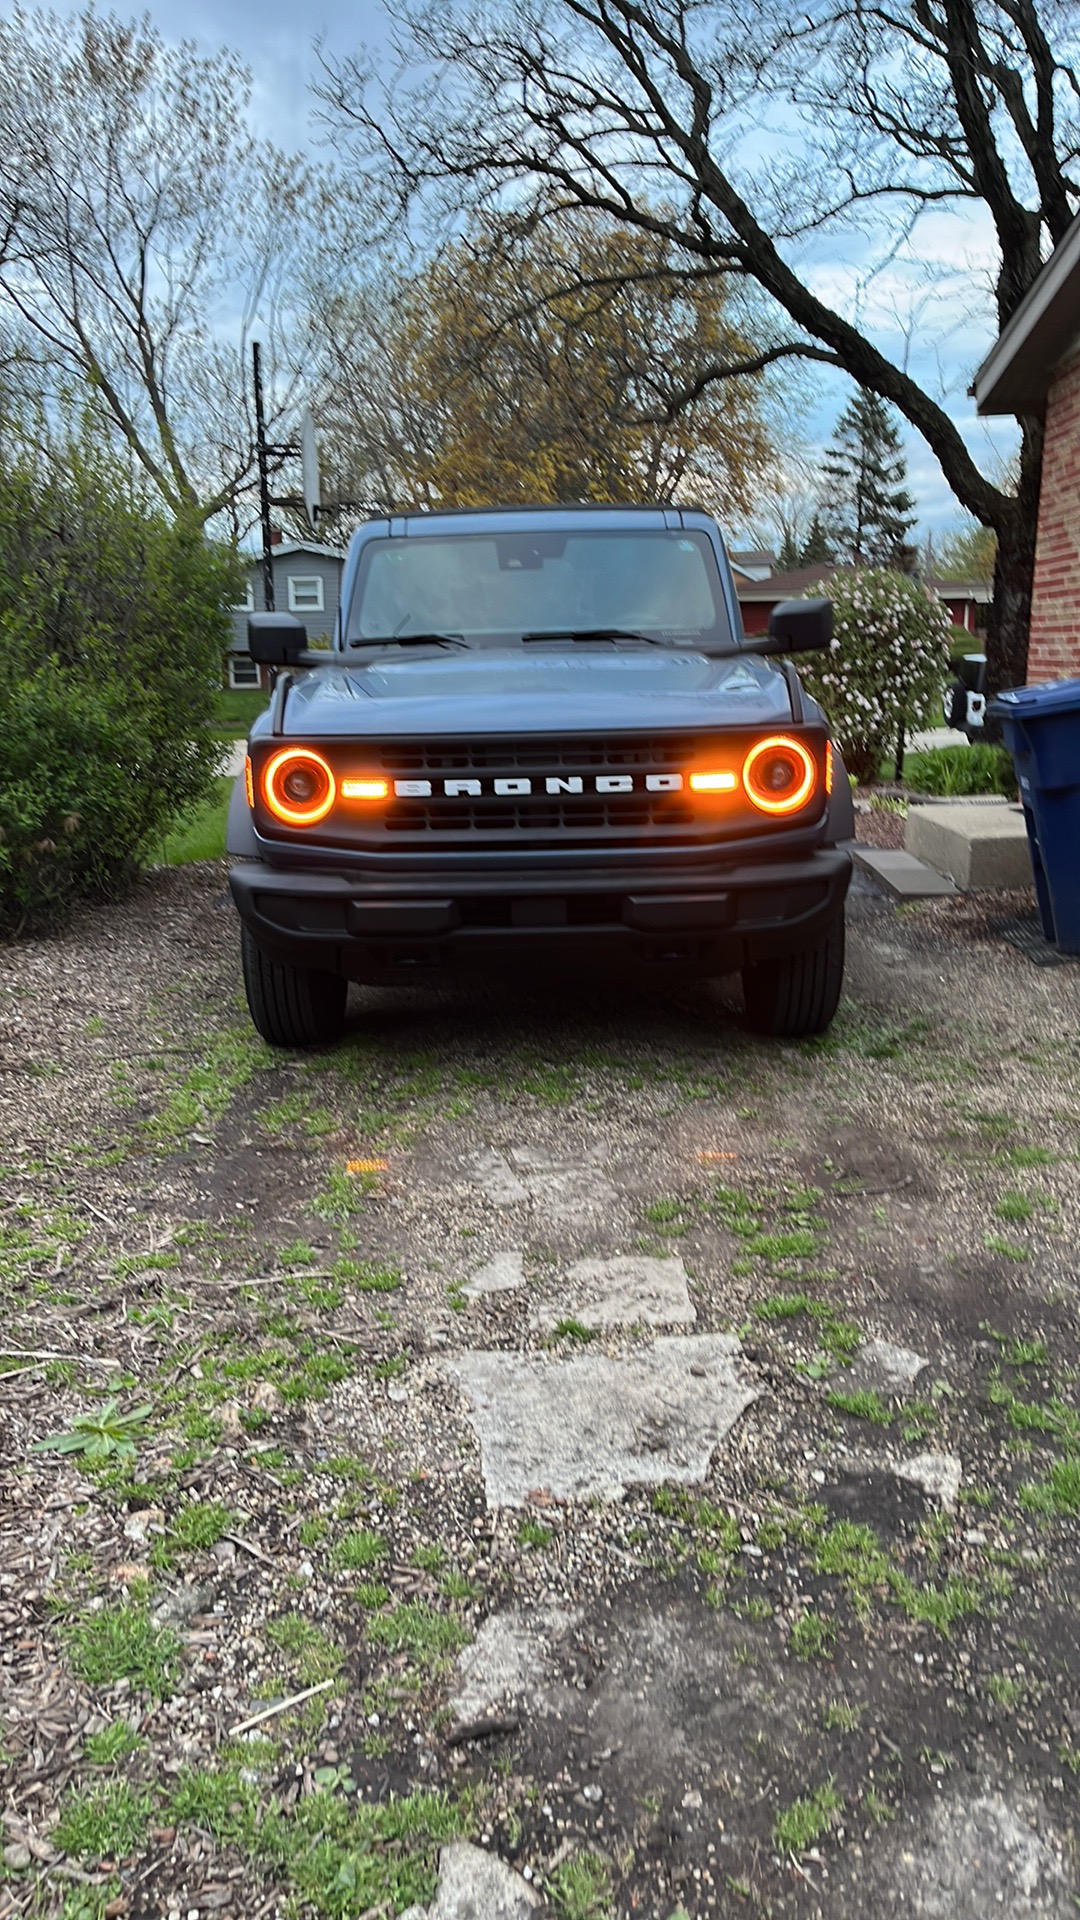 Ford Bronco Oracle LED headlights installed. Driver side brighter than other side 36D84219-E178-4230-86B3-AD77FD78EC1F